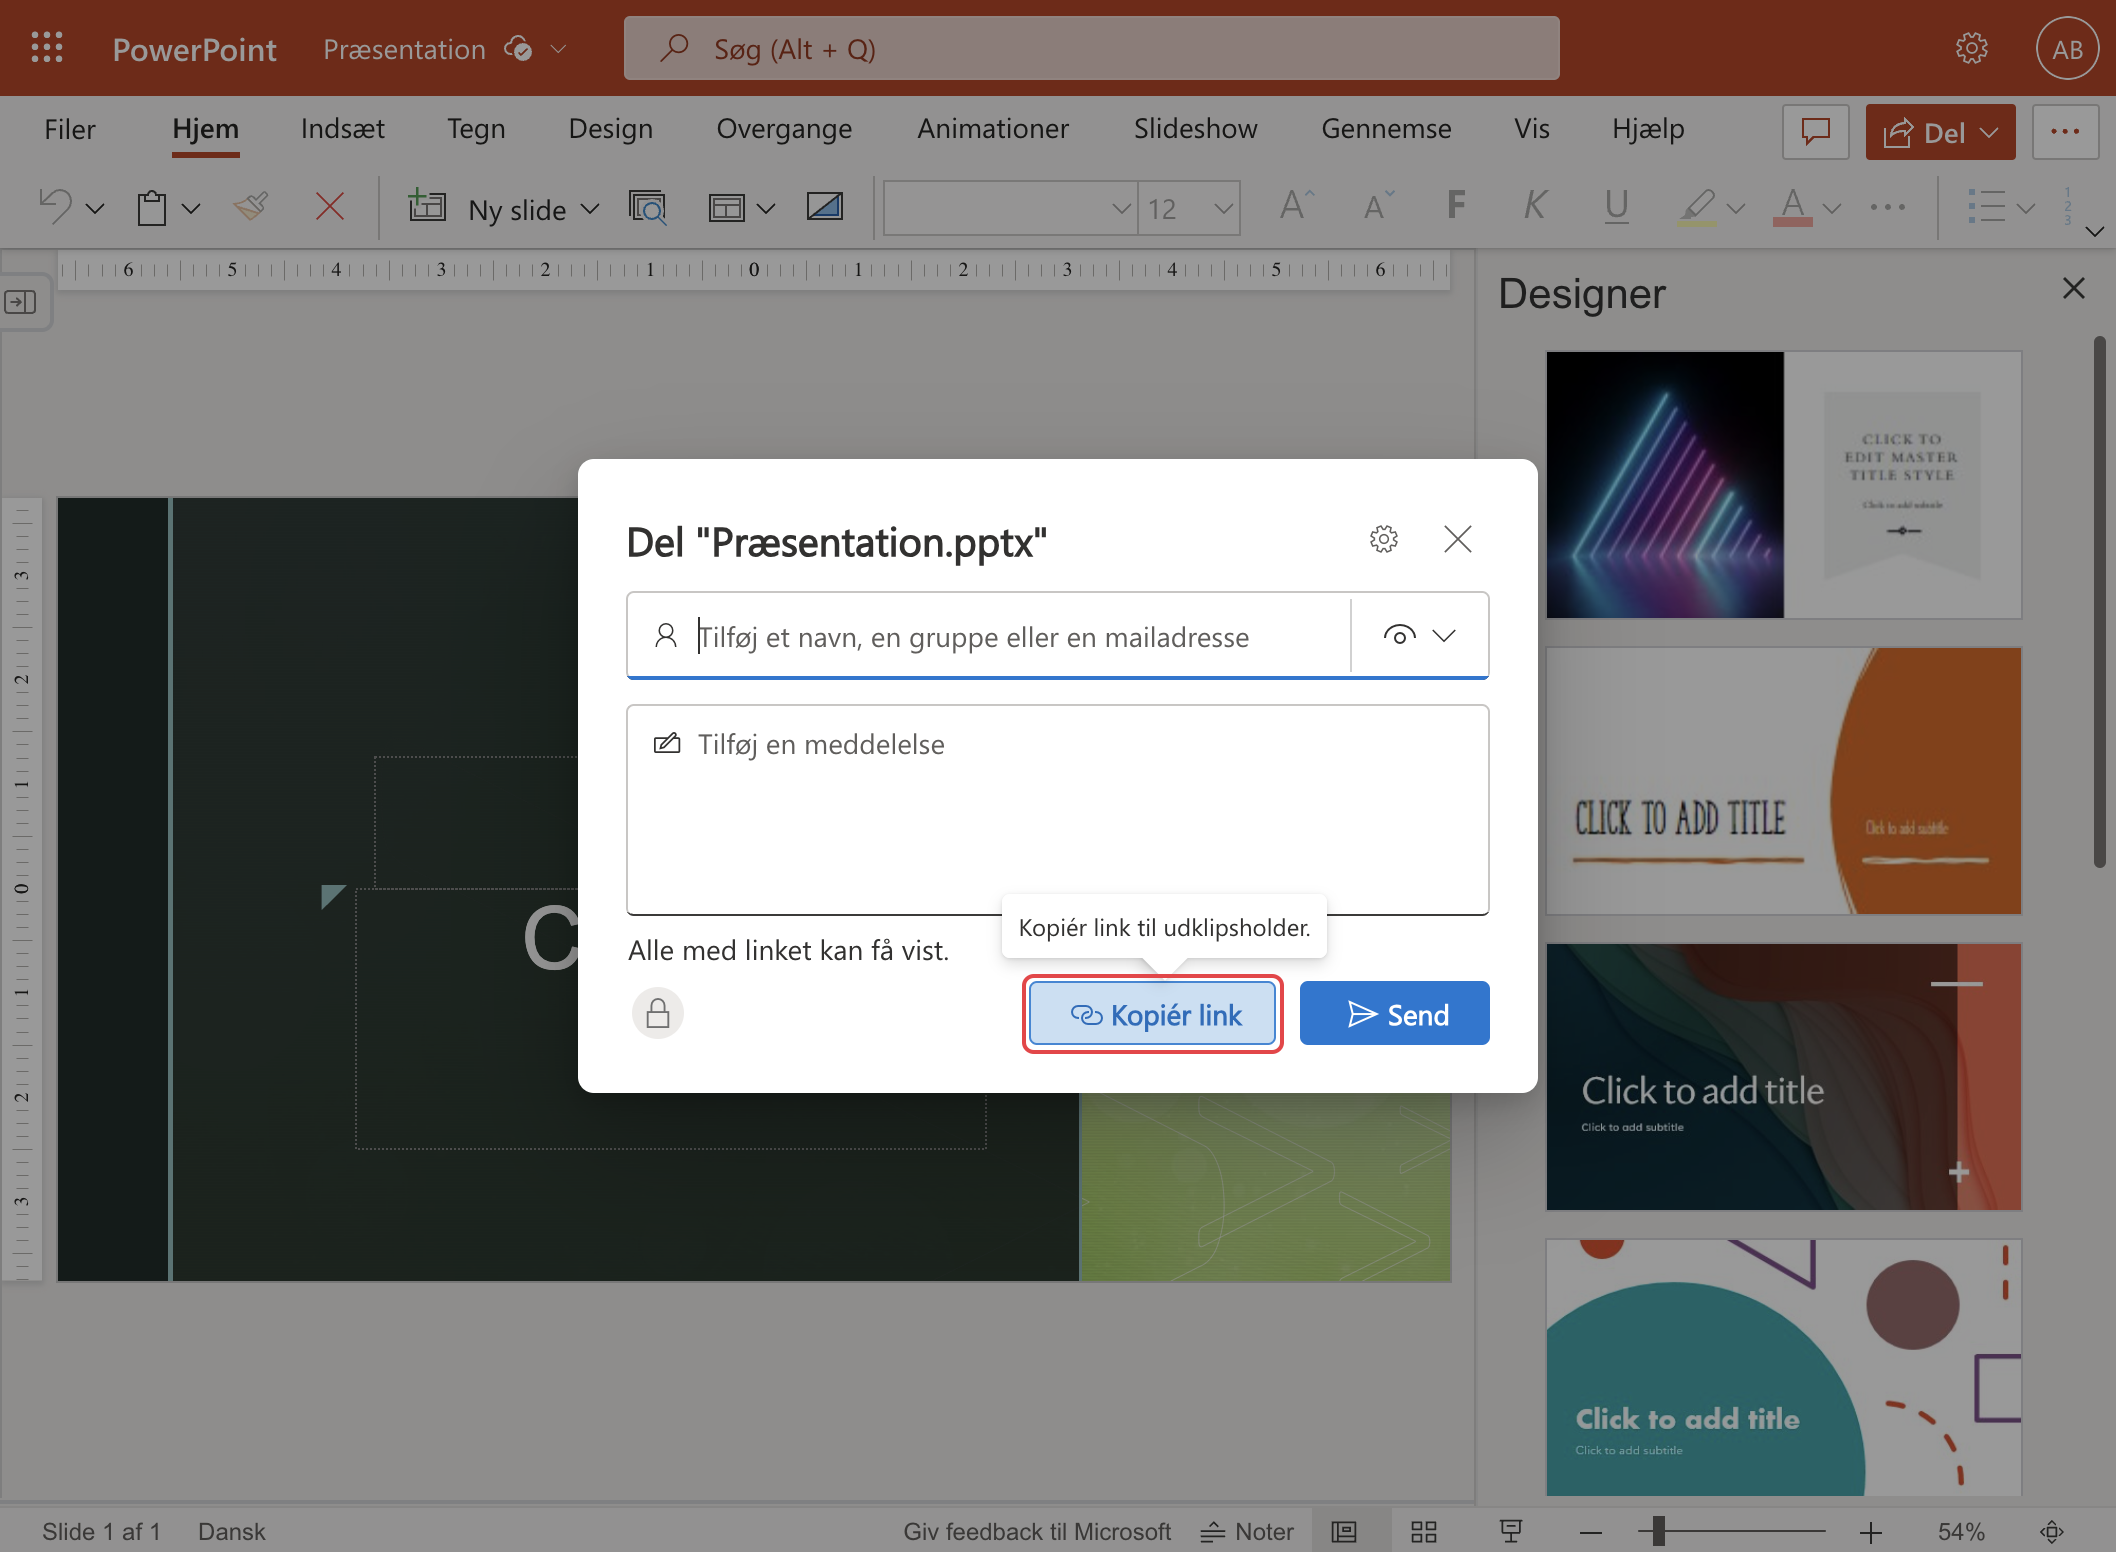 A dialog box in PowerPoint for sharing 'Presentation.pptx', with options to enter a name or email, add a message, and a highlighted 'Copy link' button.